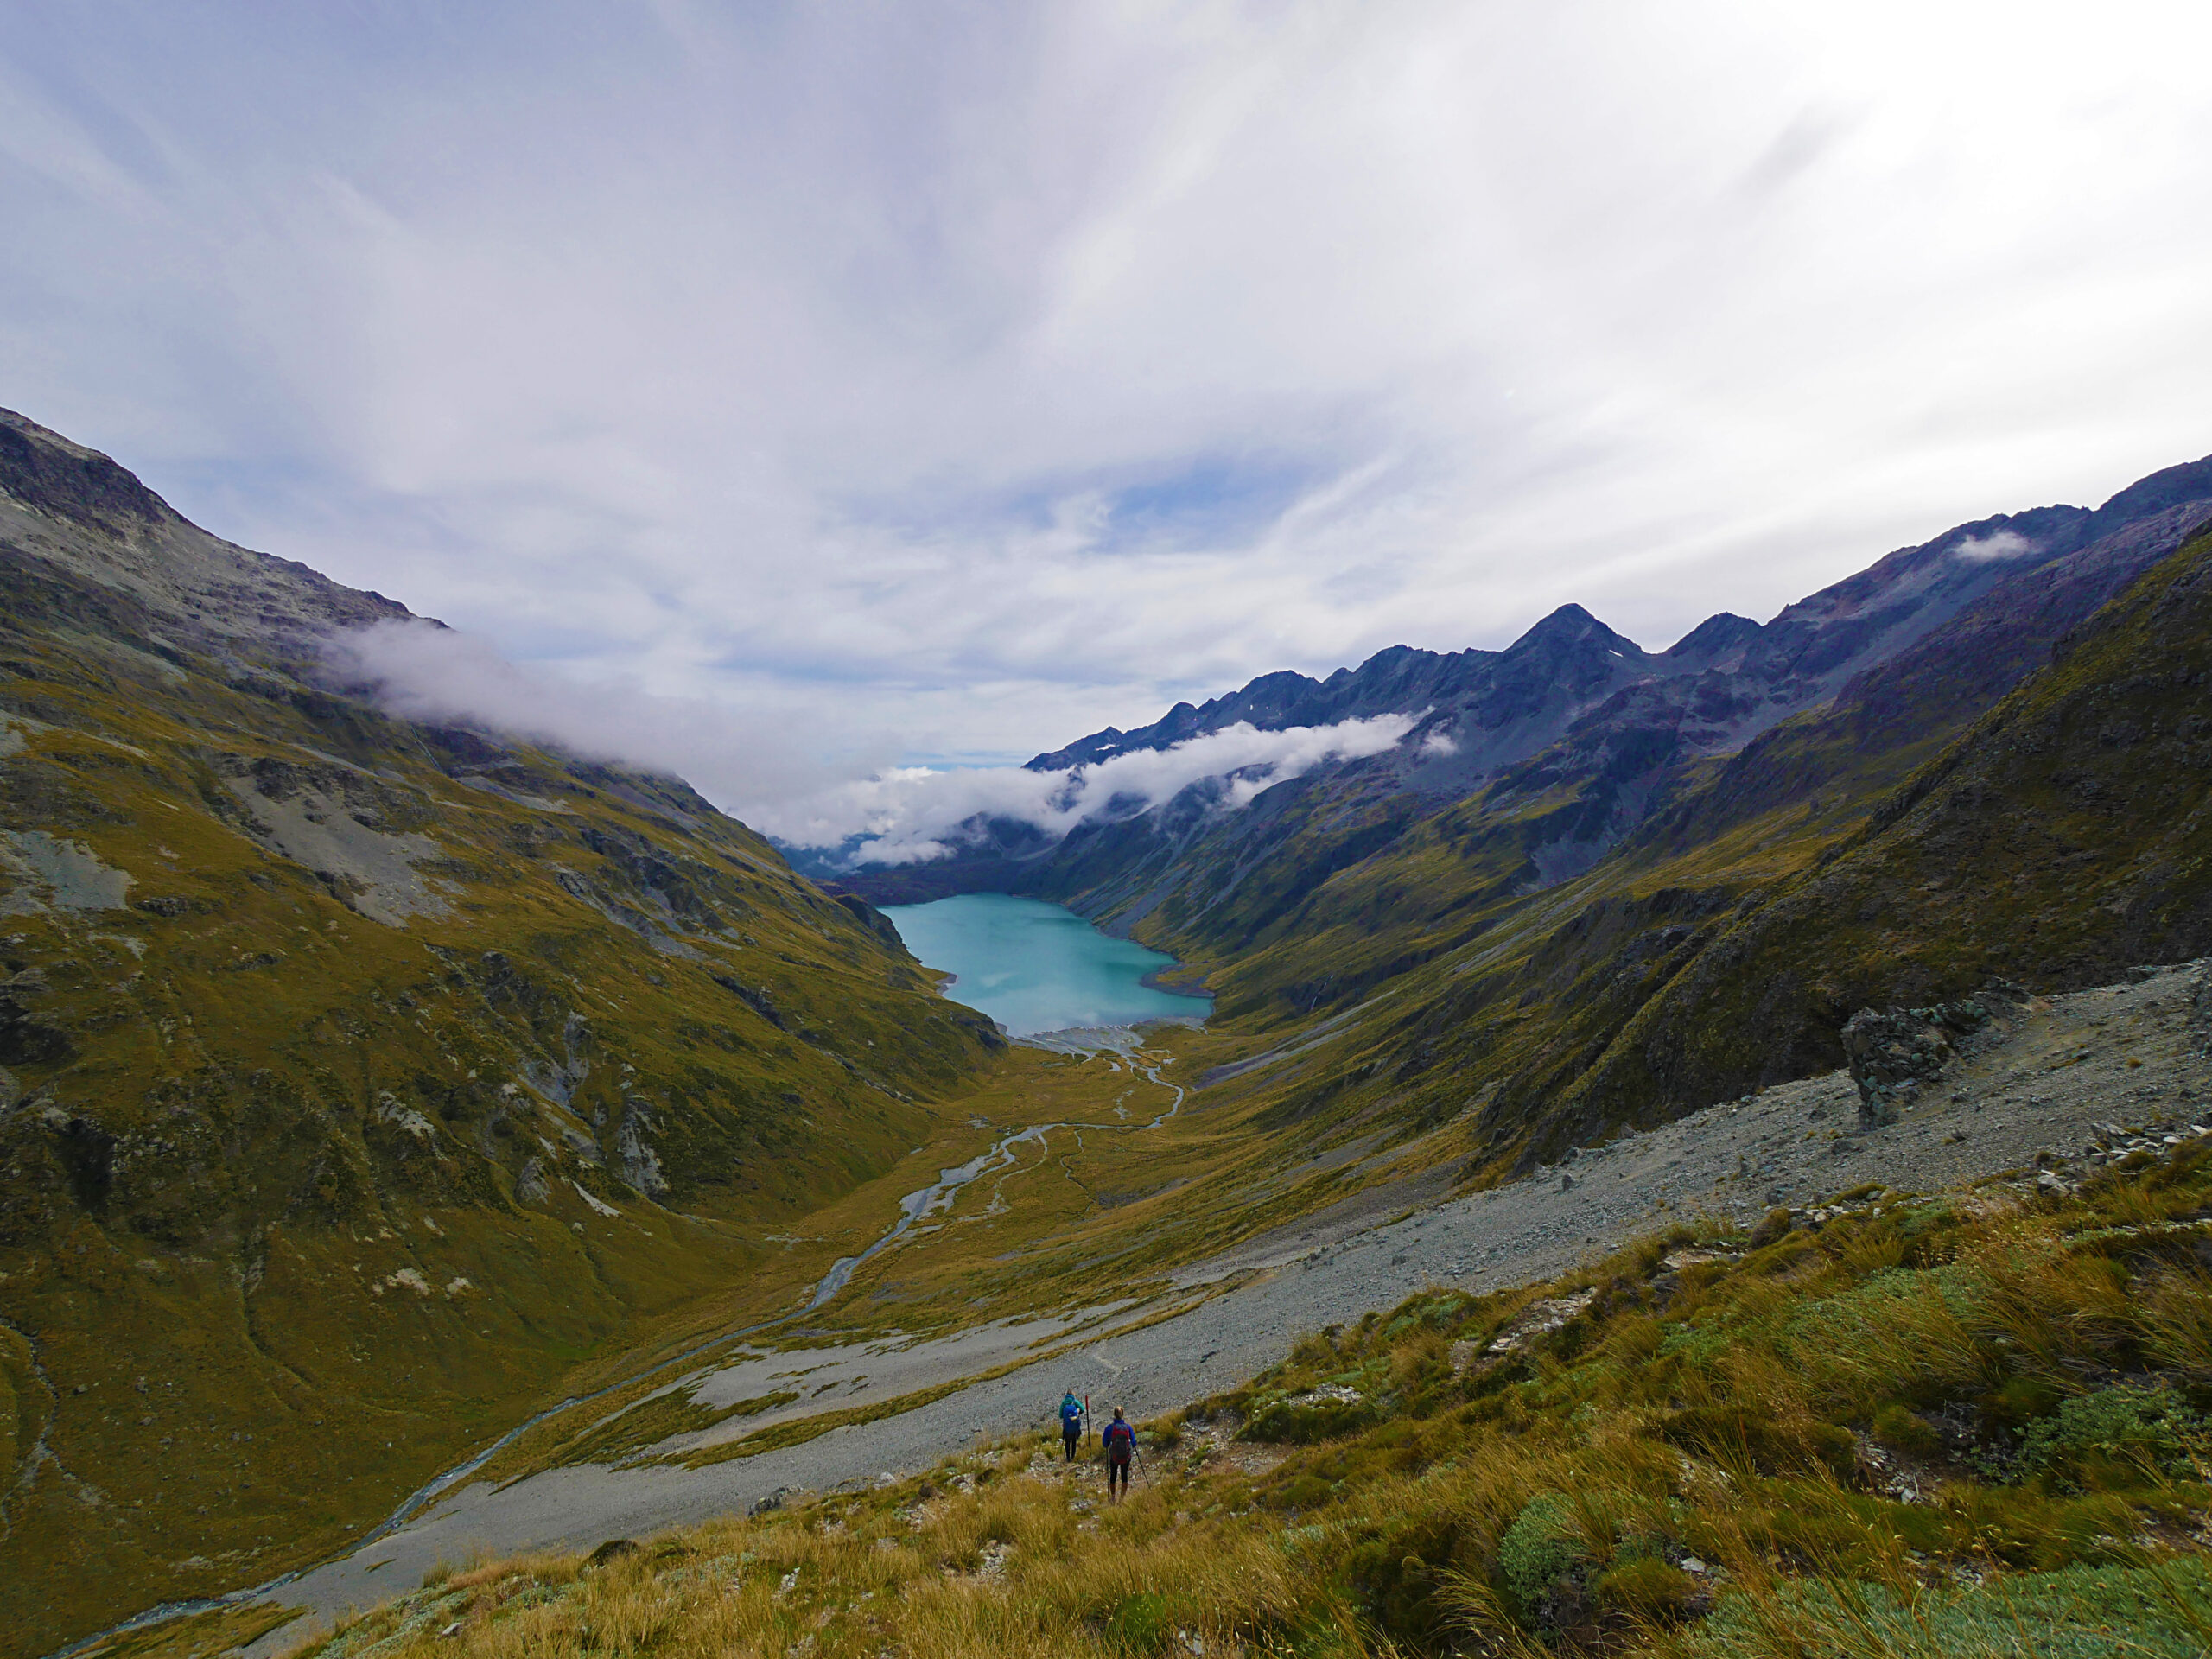 The view of Lake Constance from the top of Waiau Pass is one of the most beautiful sights in all of New Zealand.